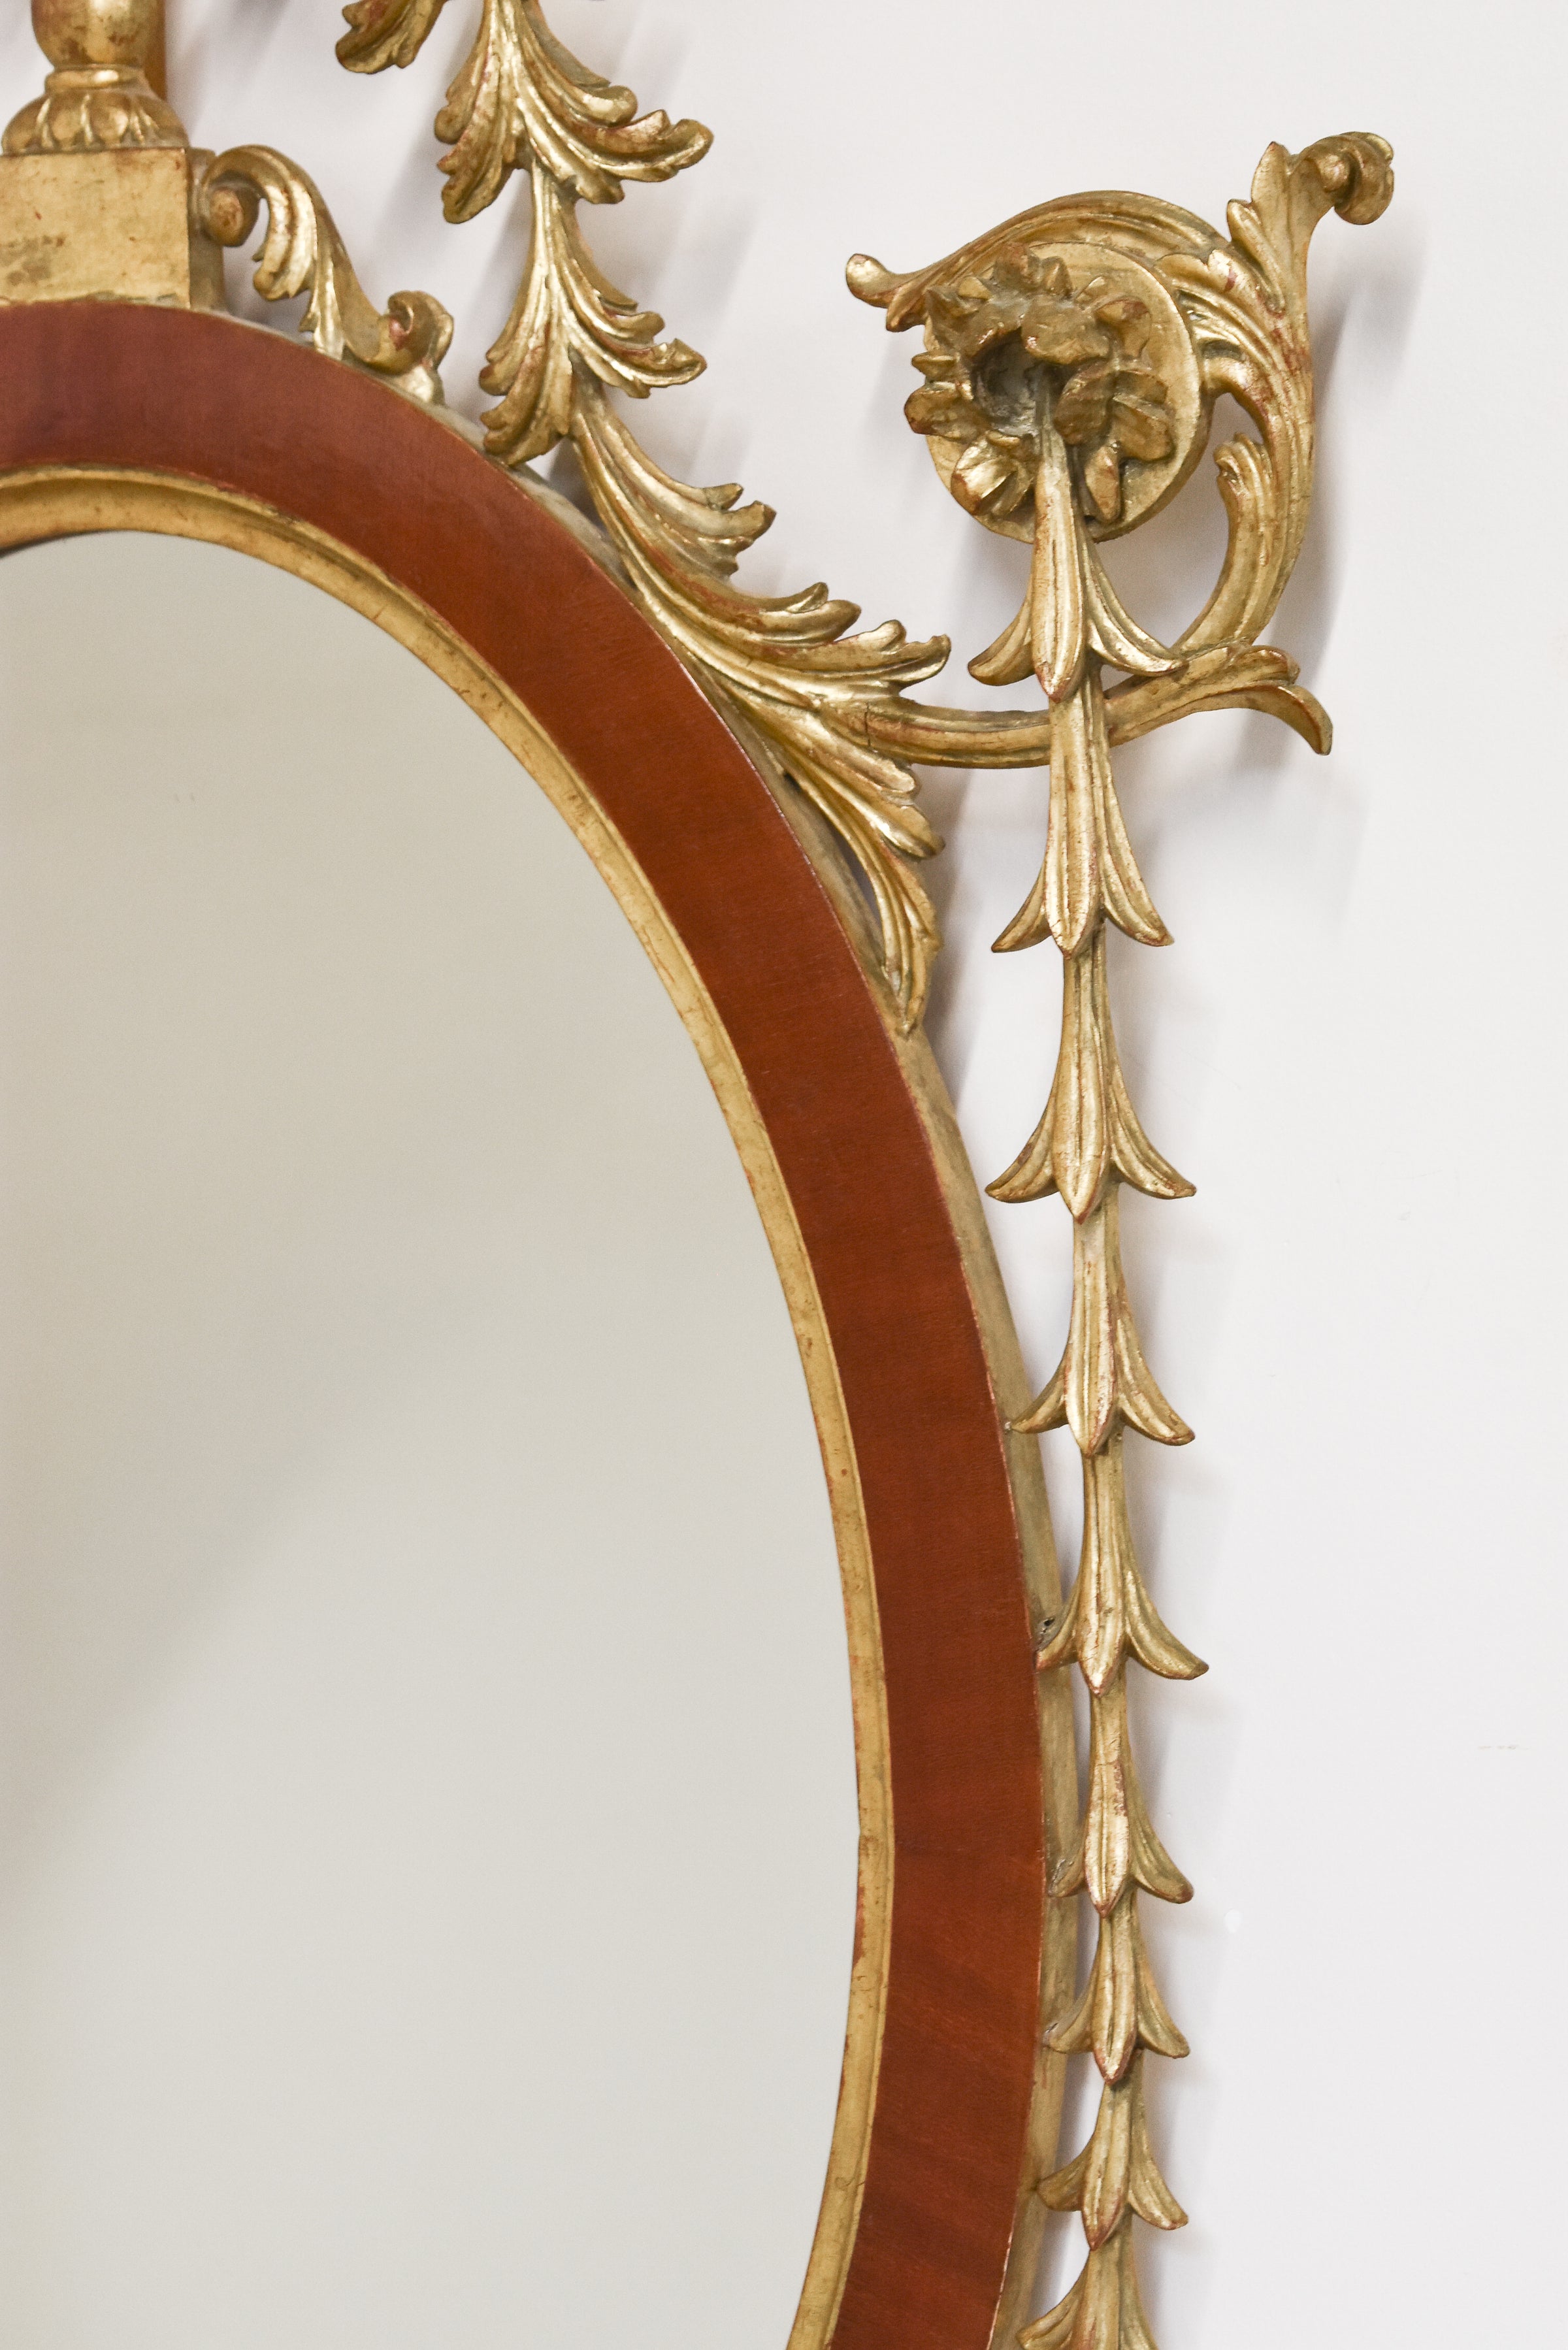 Vintage Gilt Wood and Stained Wood Regency Mirror